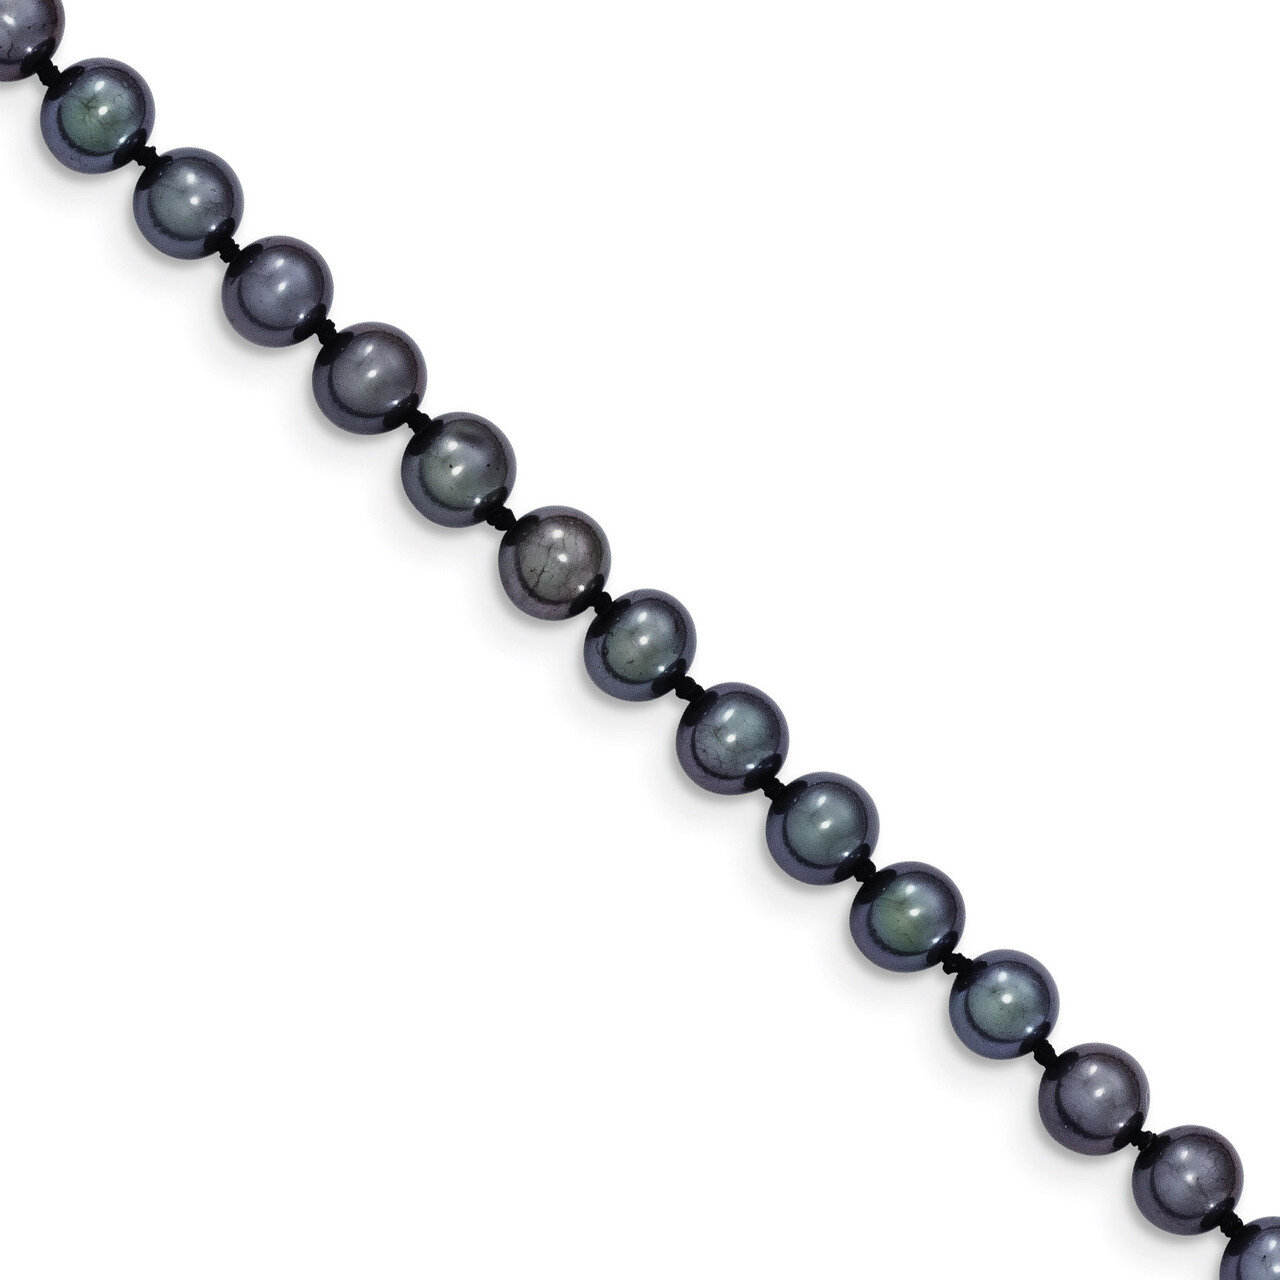 5-6mm Black Cultured Near Round Pearl Necklace 24 Inch 14k Gold BPN050-24